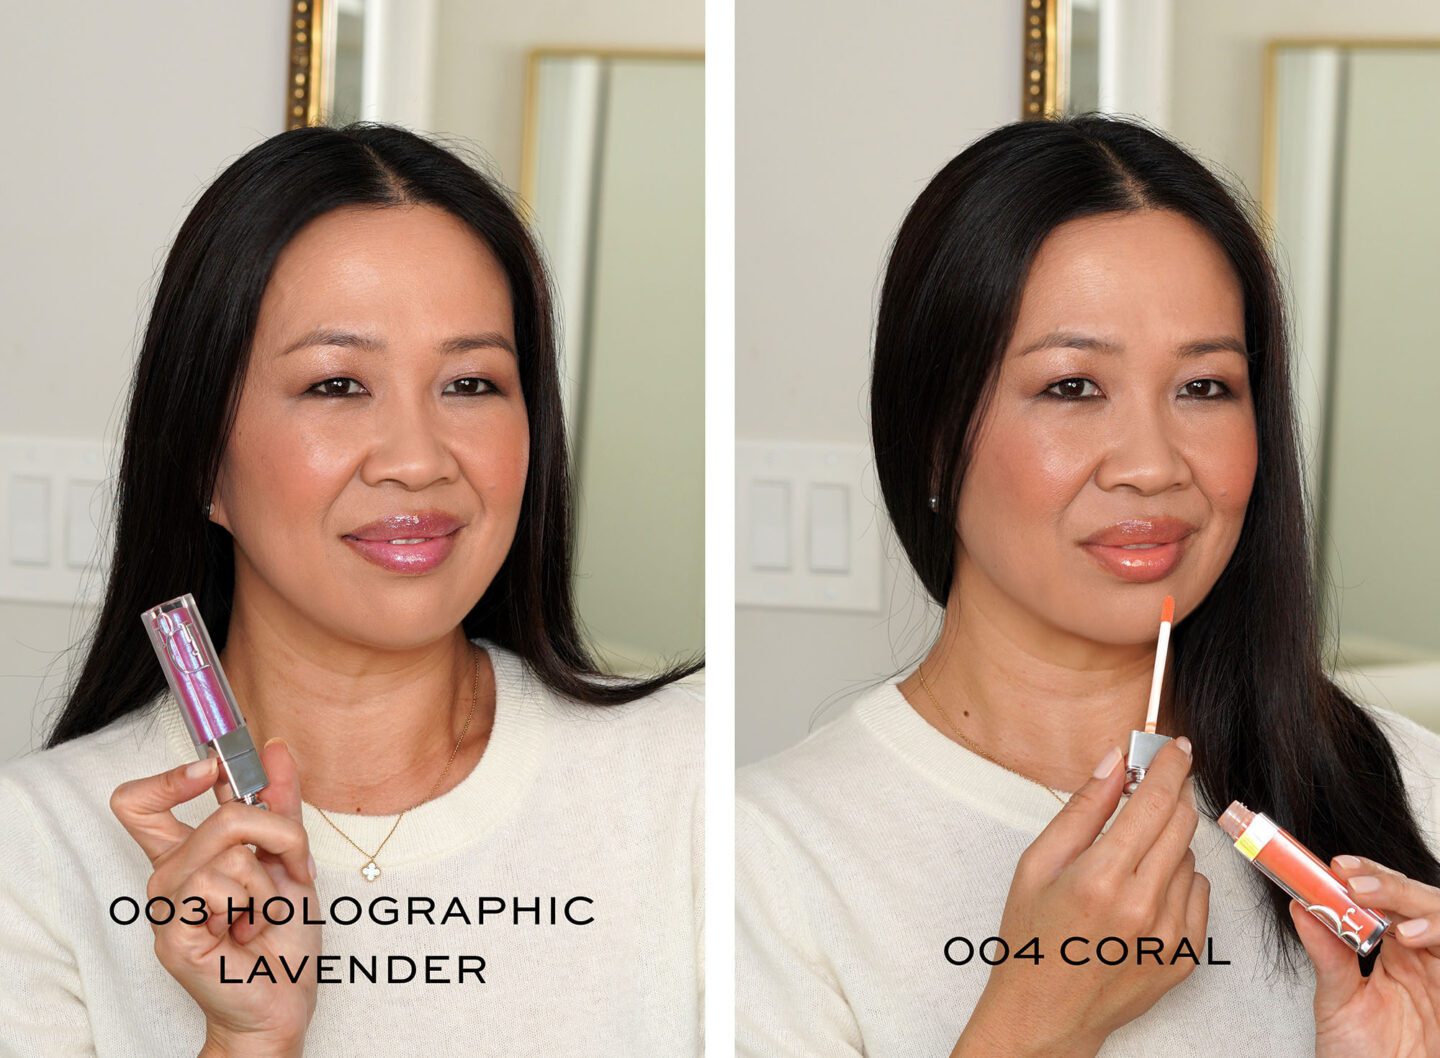 Dior Lip Maximizer in 003 Holographic Lavender and 004 Coral